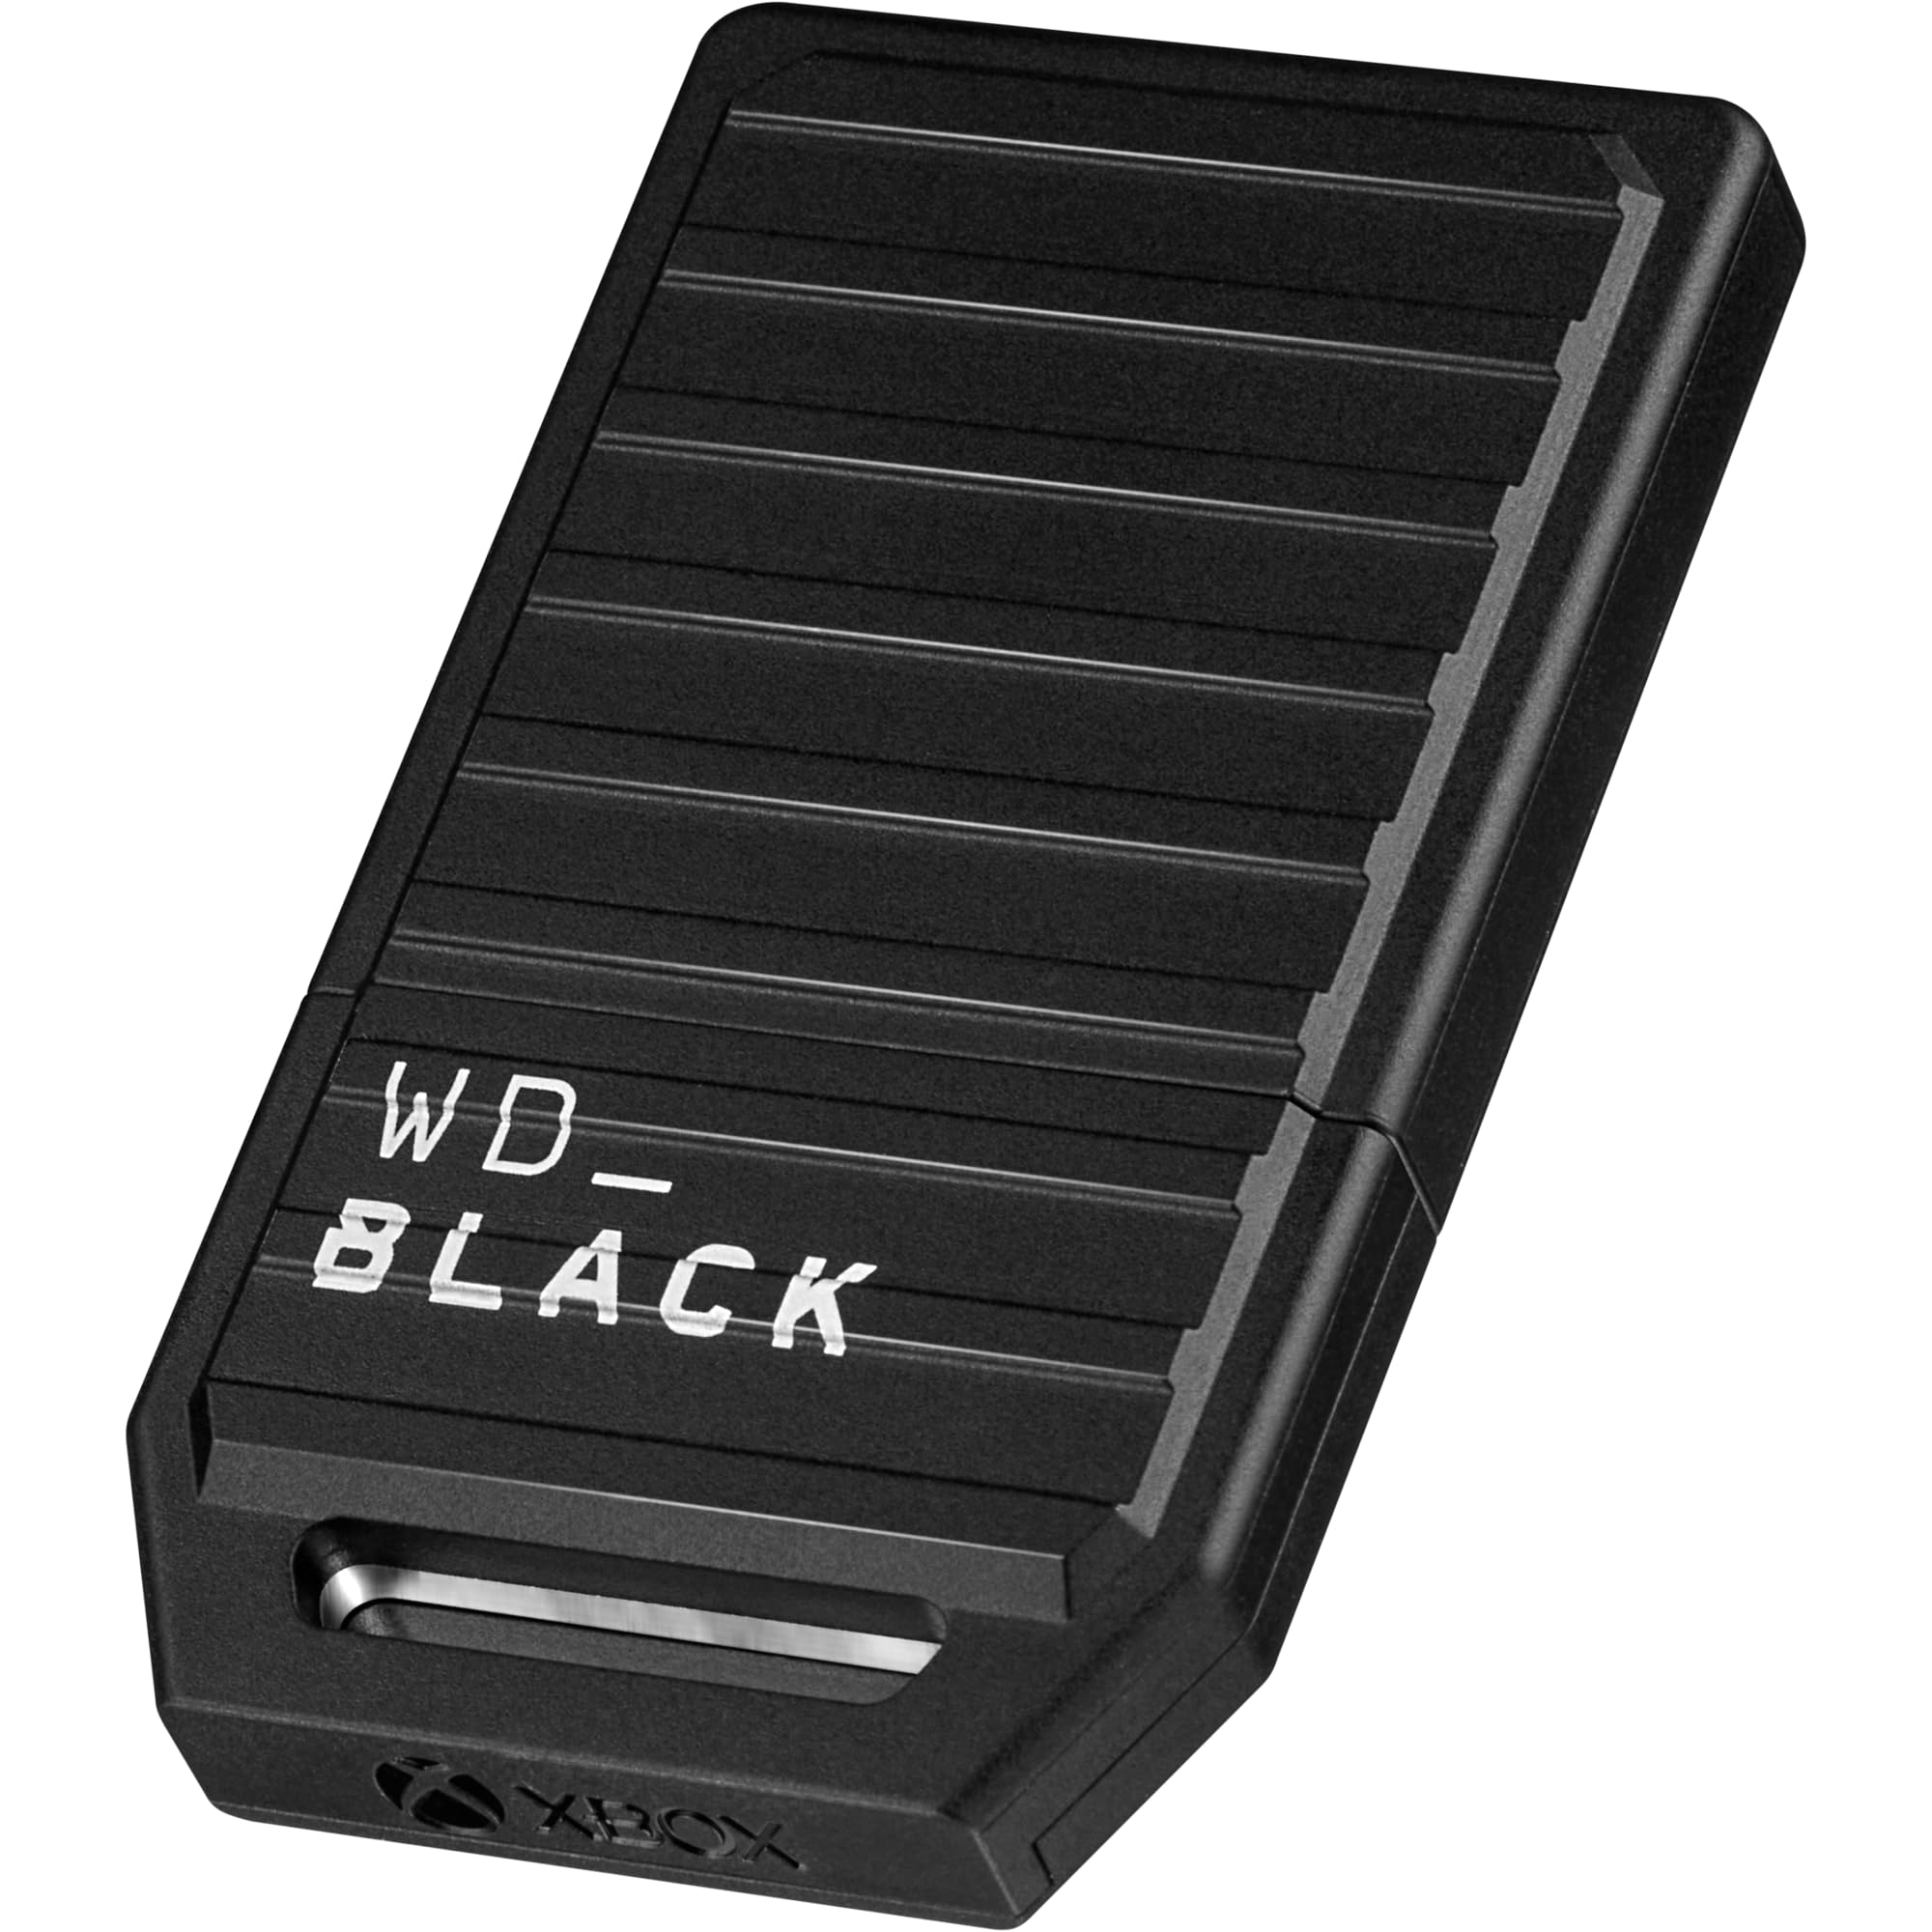 WD_Black 1TB Xbox Expansion Card - Amazon Lightning Deal for $127.49